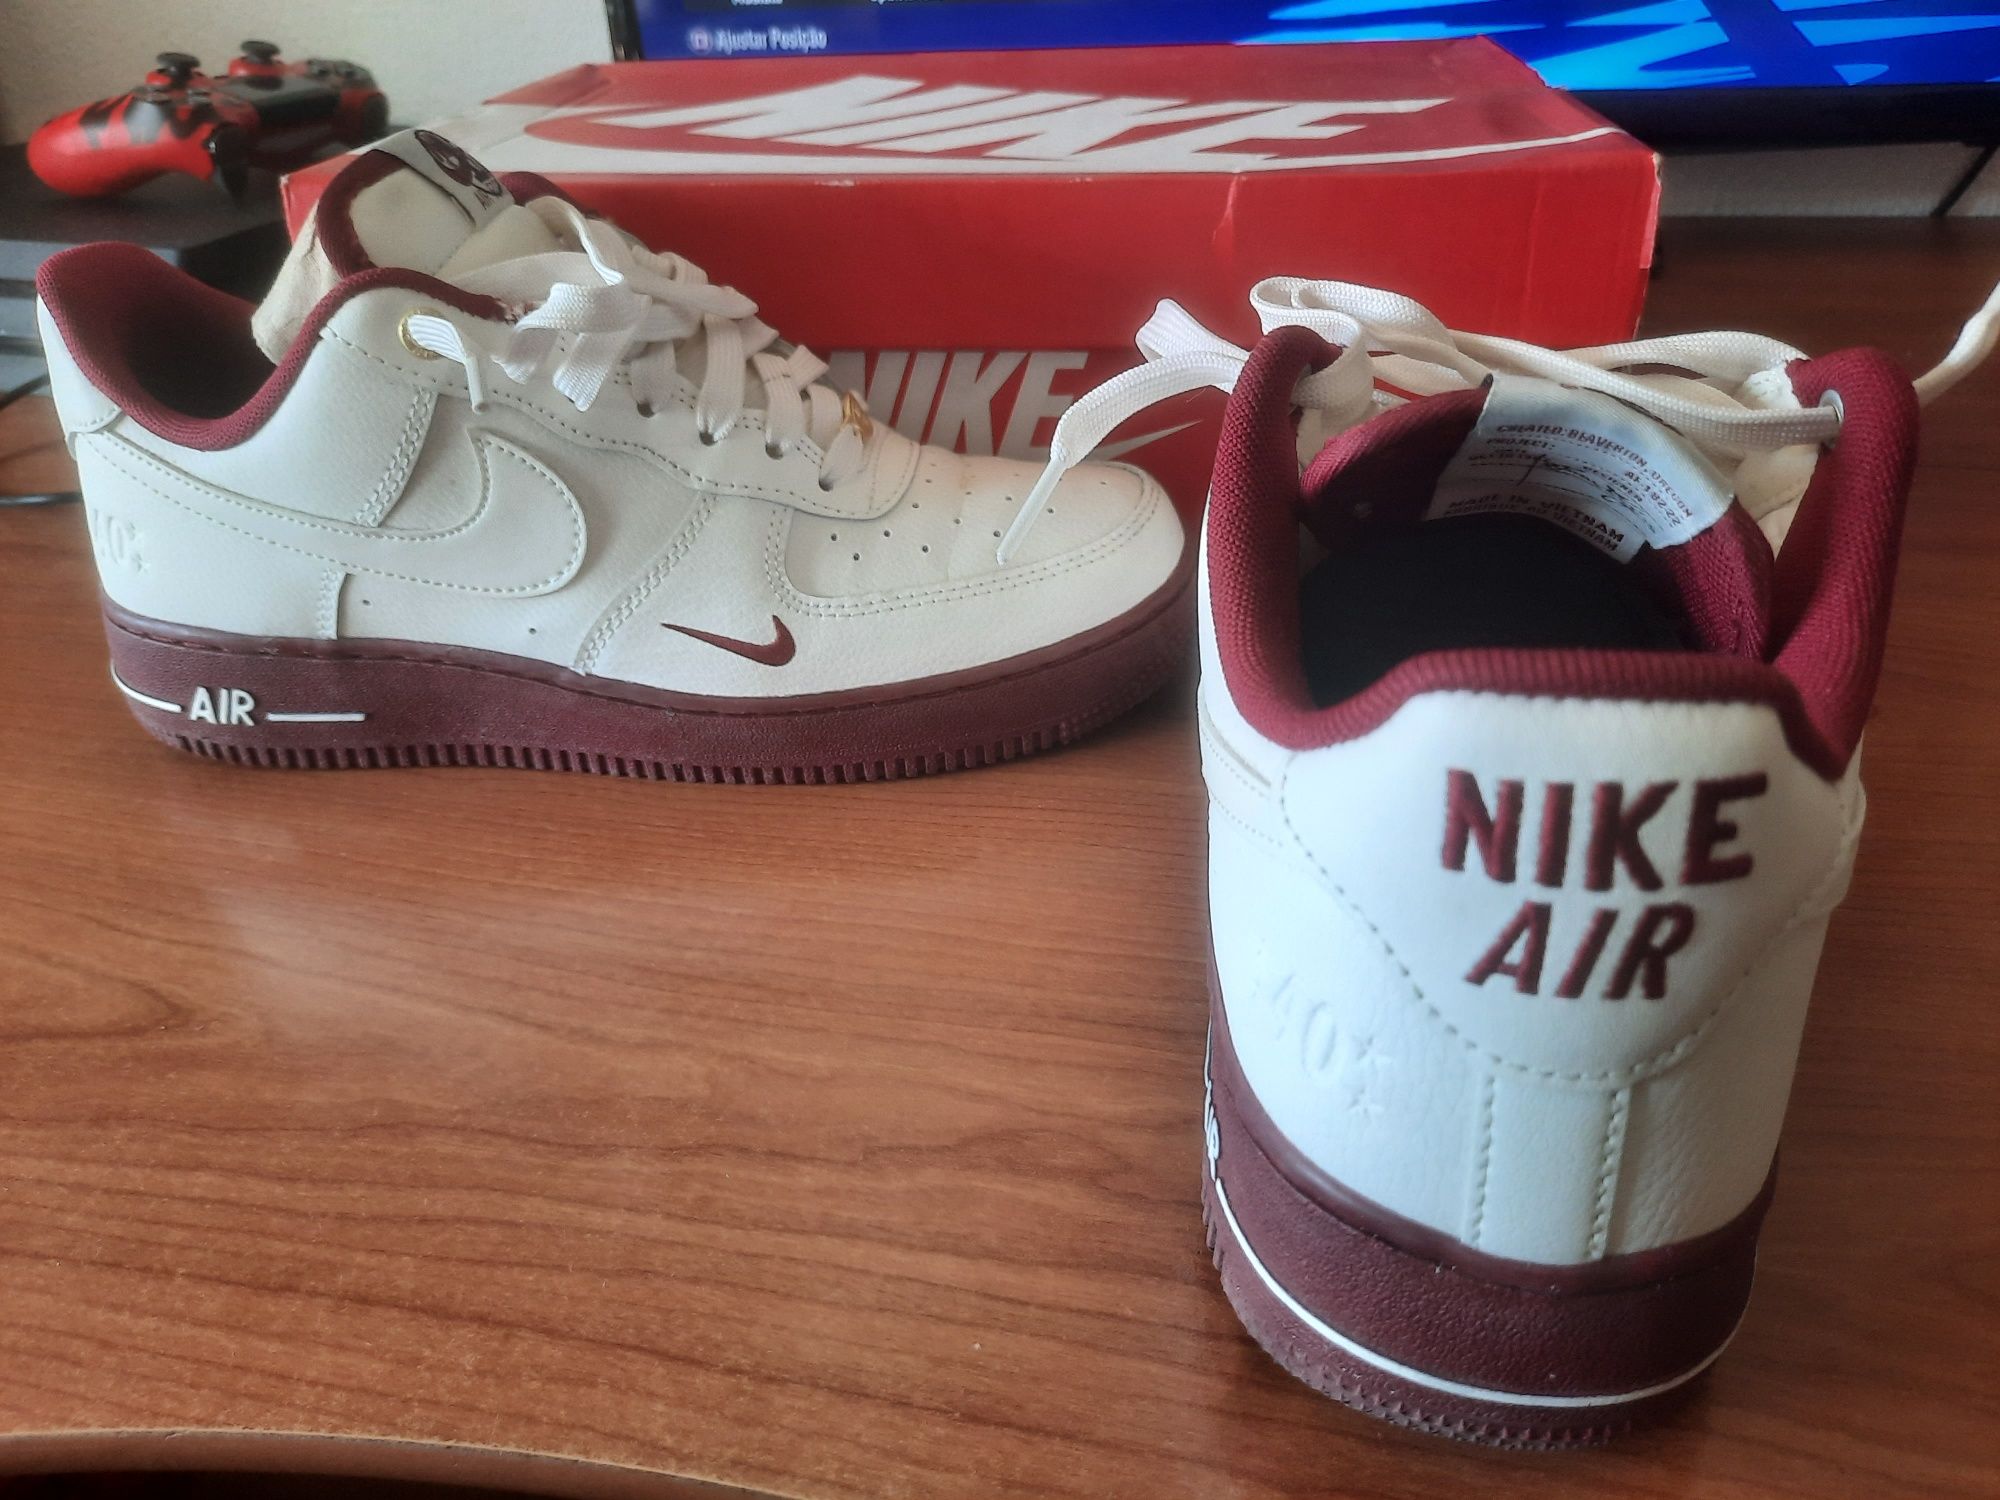 Air force 1 40th anniversary of the NIKE